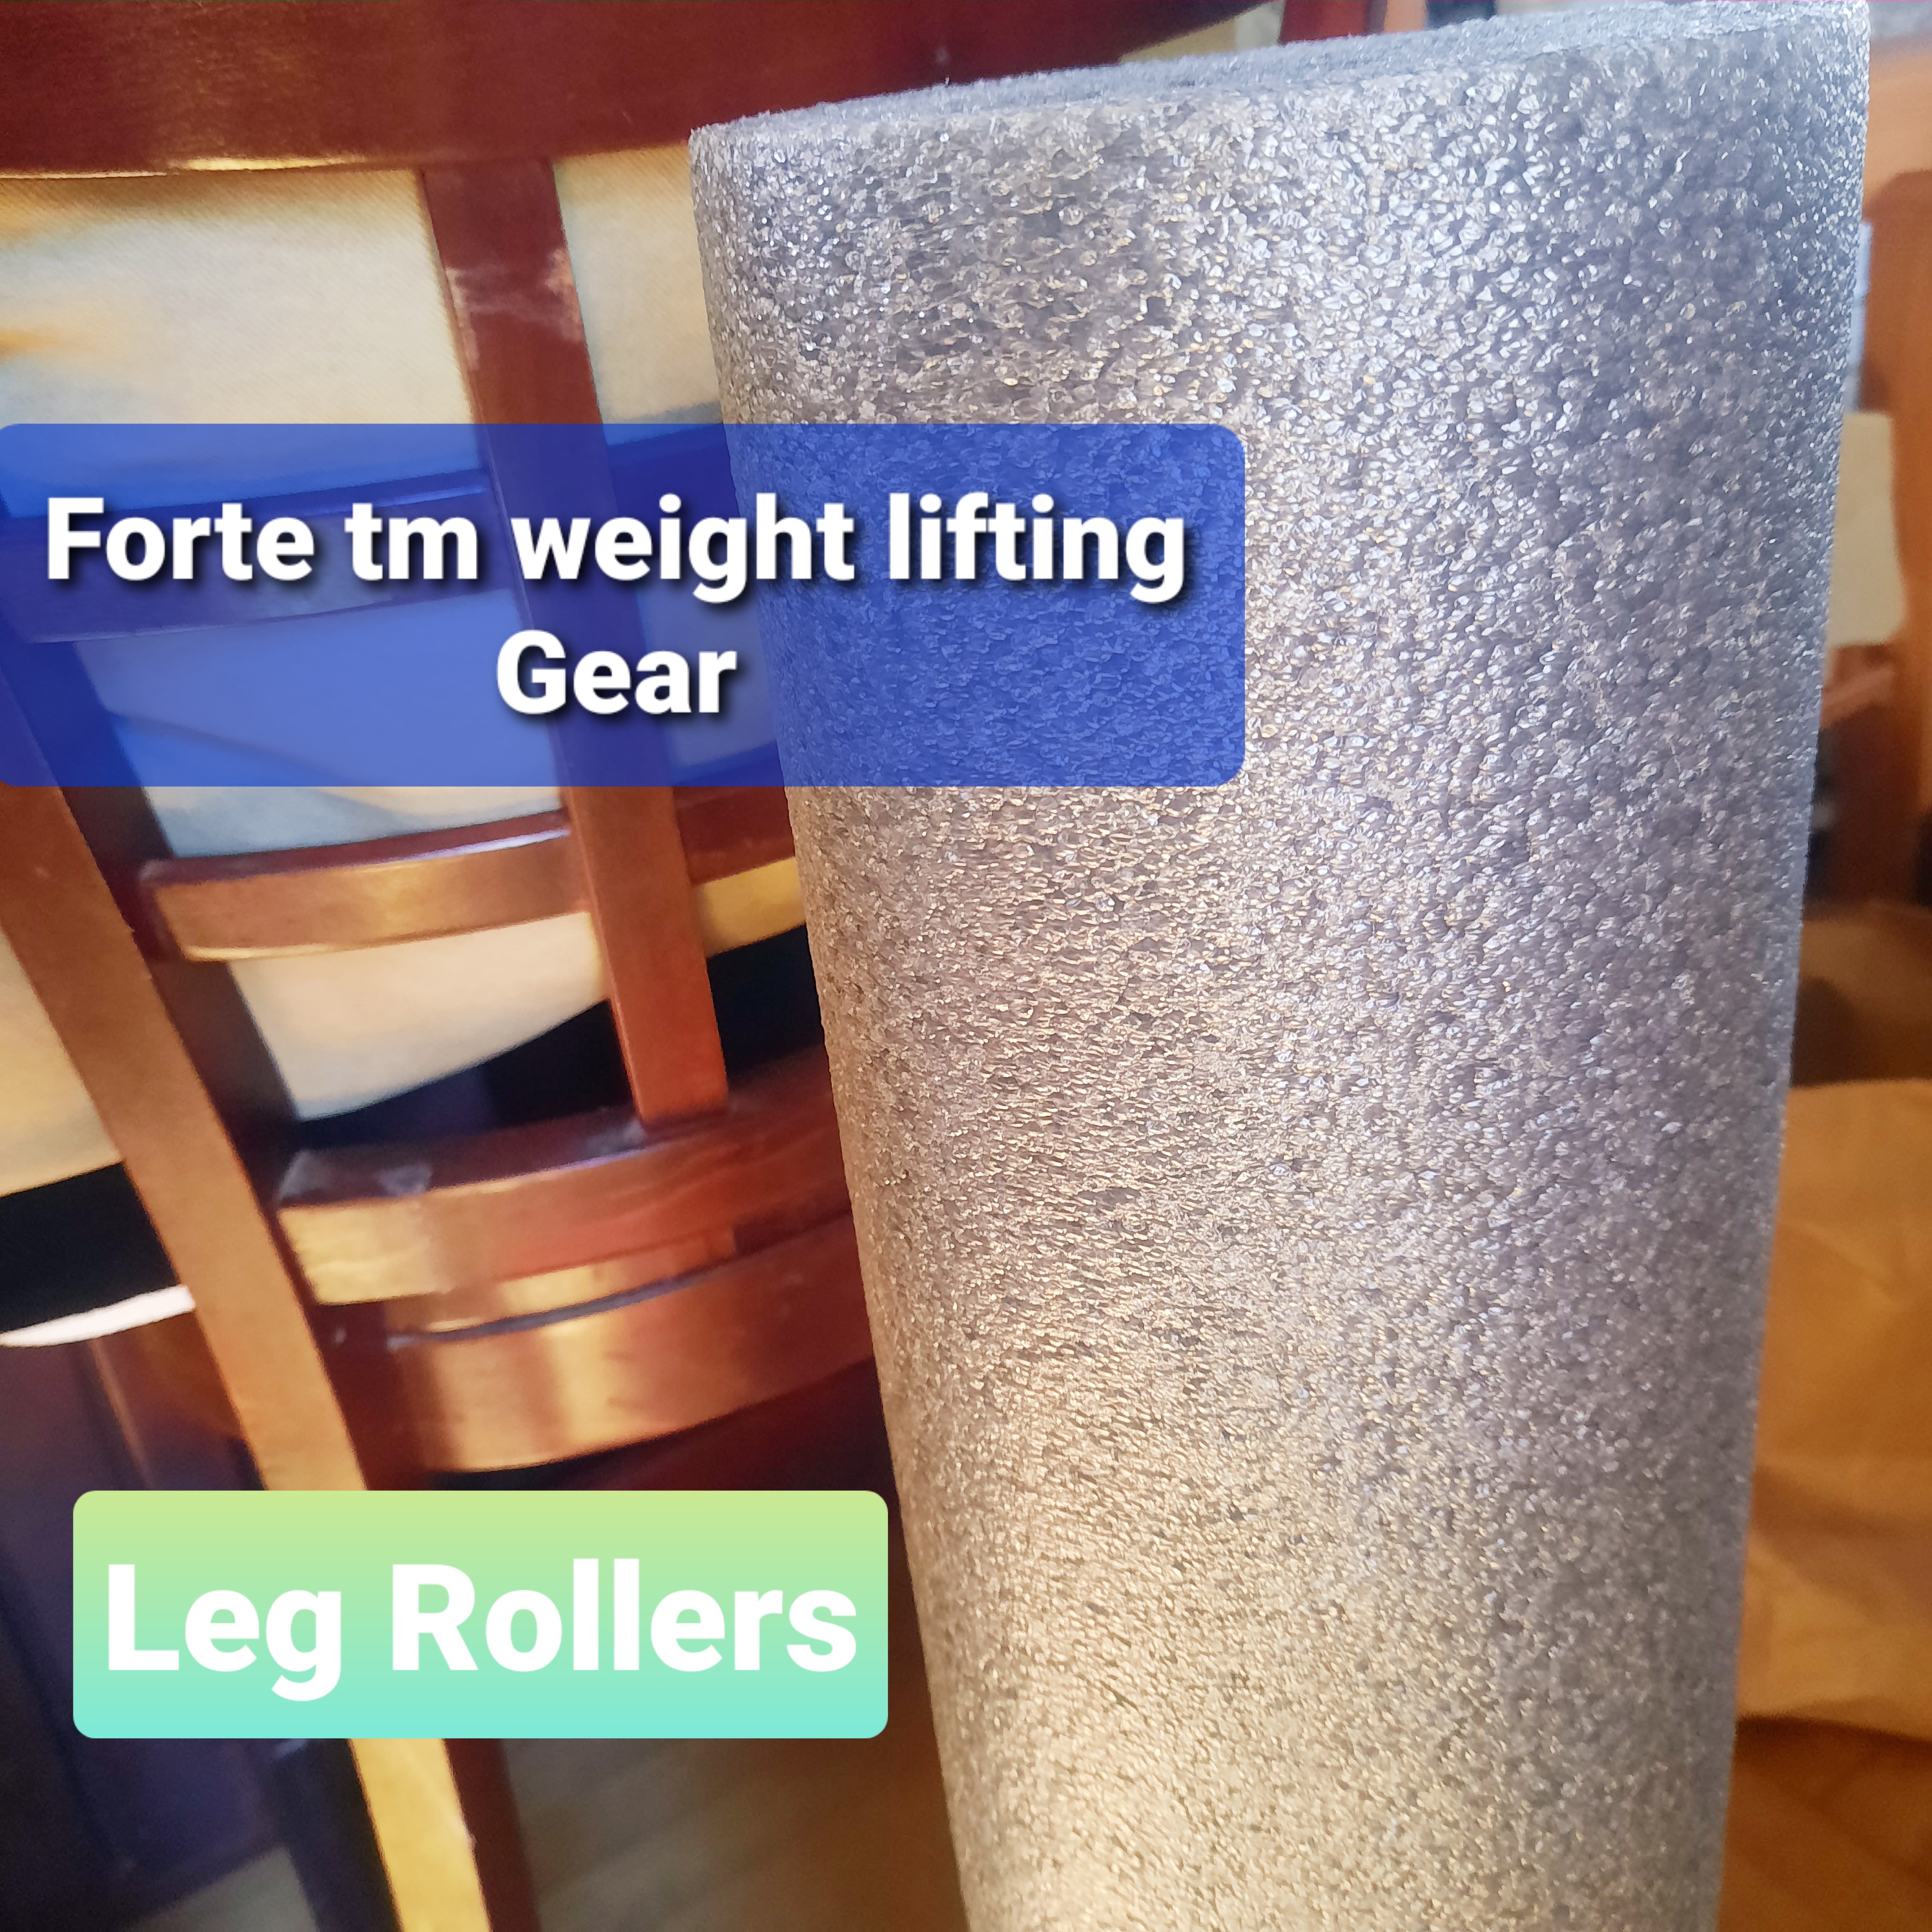 FORTE tm WEIGHT LIFTING GEAR LEG ROLLERS #,FORTE